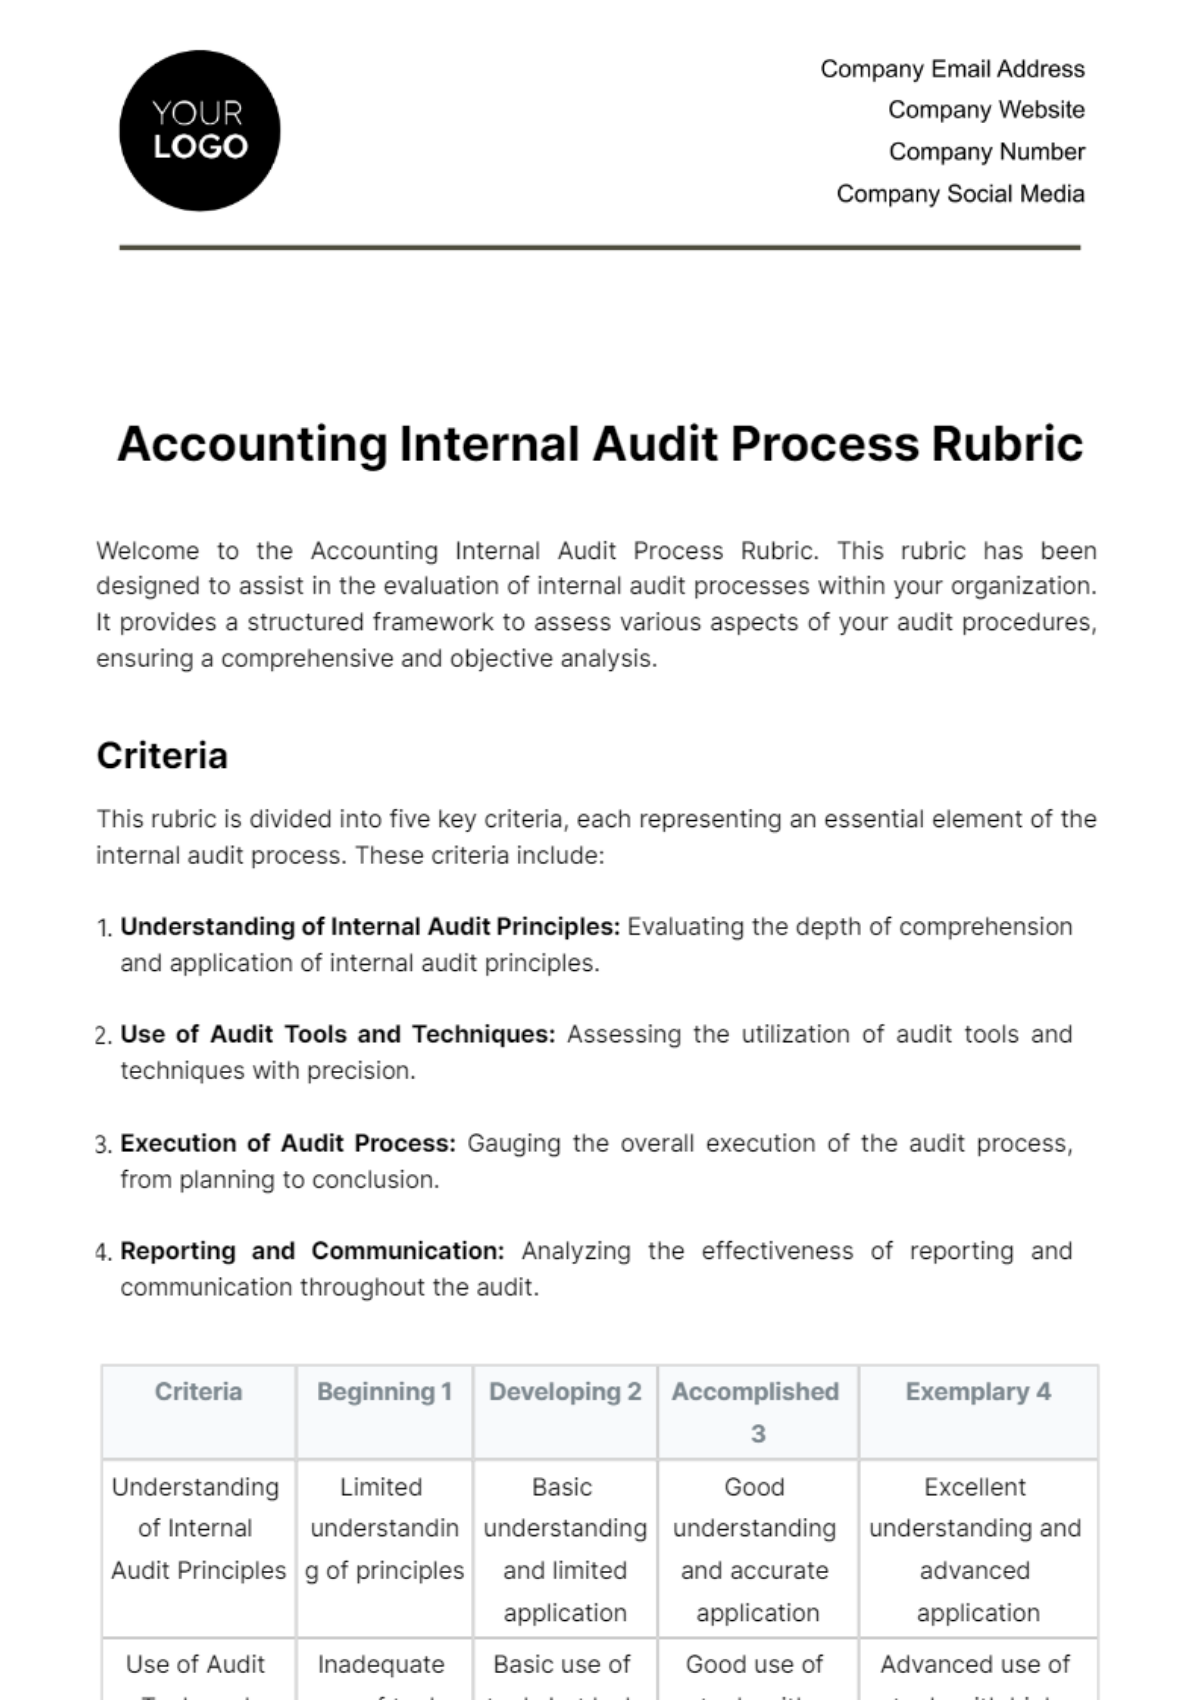 Free Accounting Internal Audit Process Rubric Template